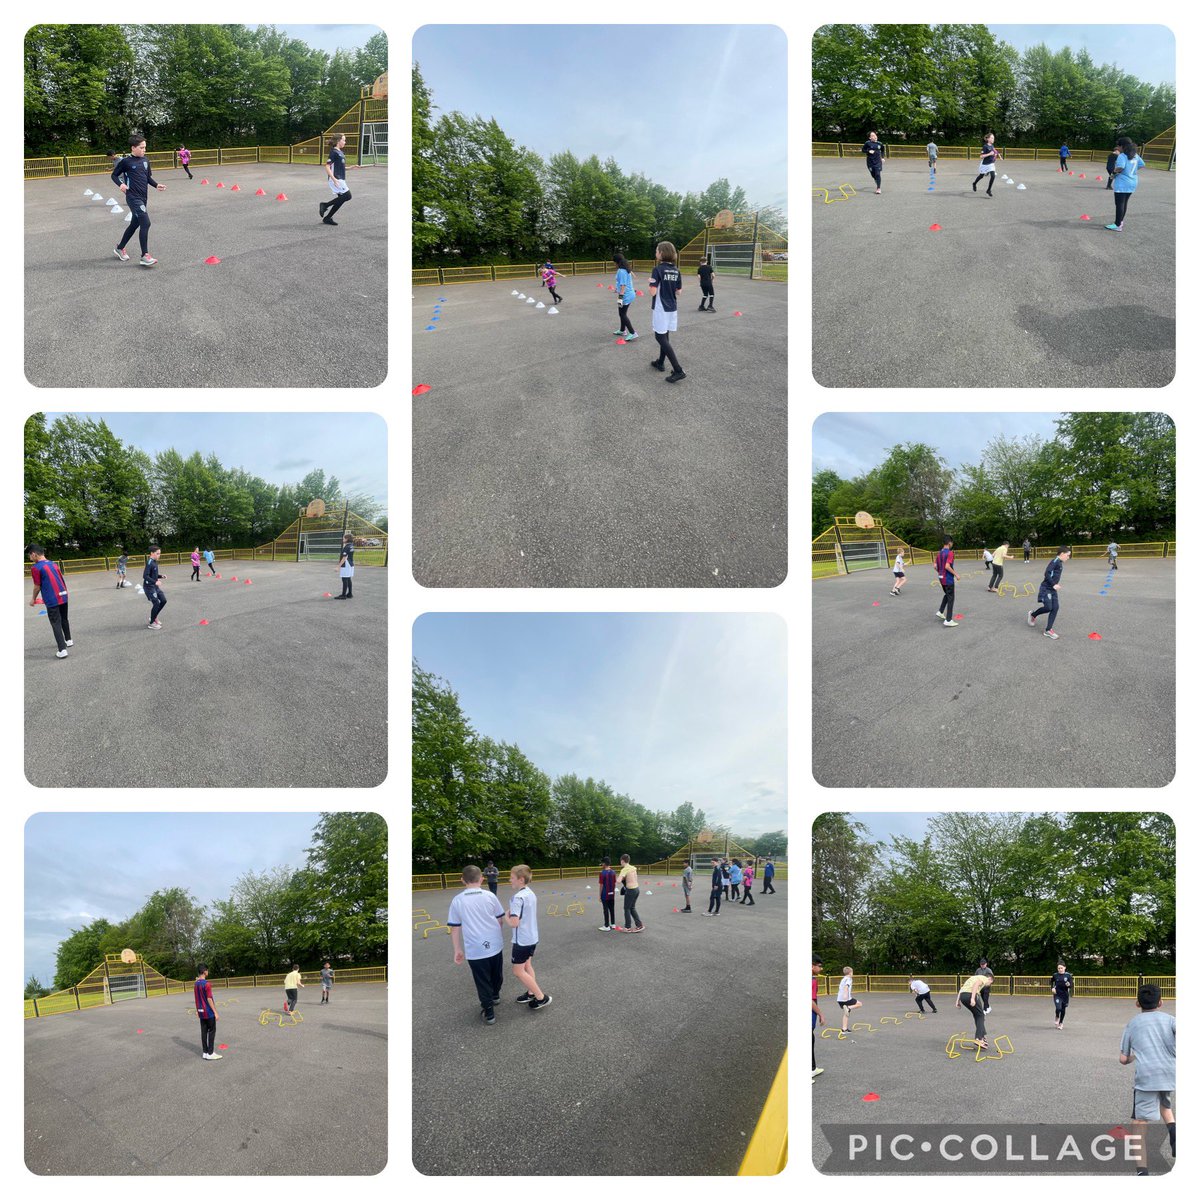 Fitness and stamina was the order of the day from Coach Paul. Less than 3 weeks to our big competition. We played a longer match than normal so Paul and I could discuss best positions for our players. The improvement is fabulous. #article15 @carronshoreps 🌕⚫️⚽️🐝